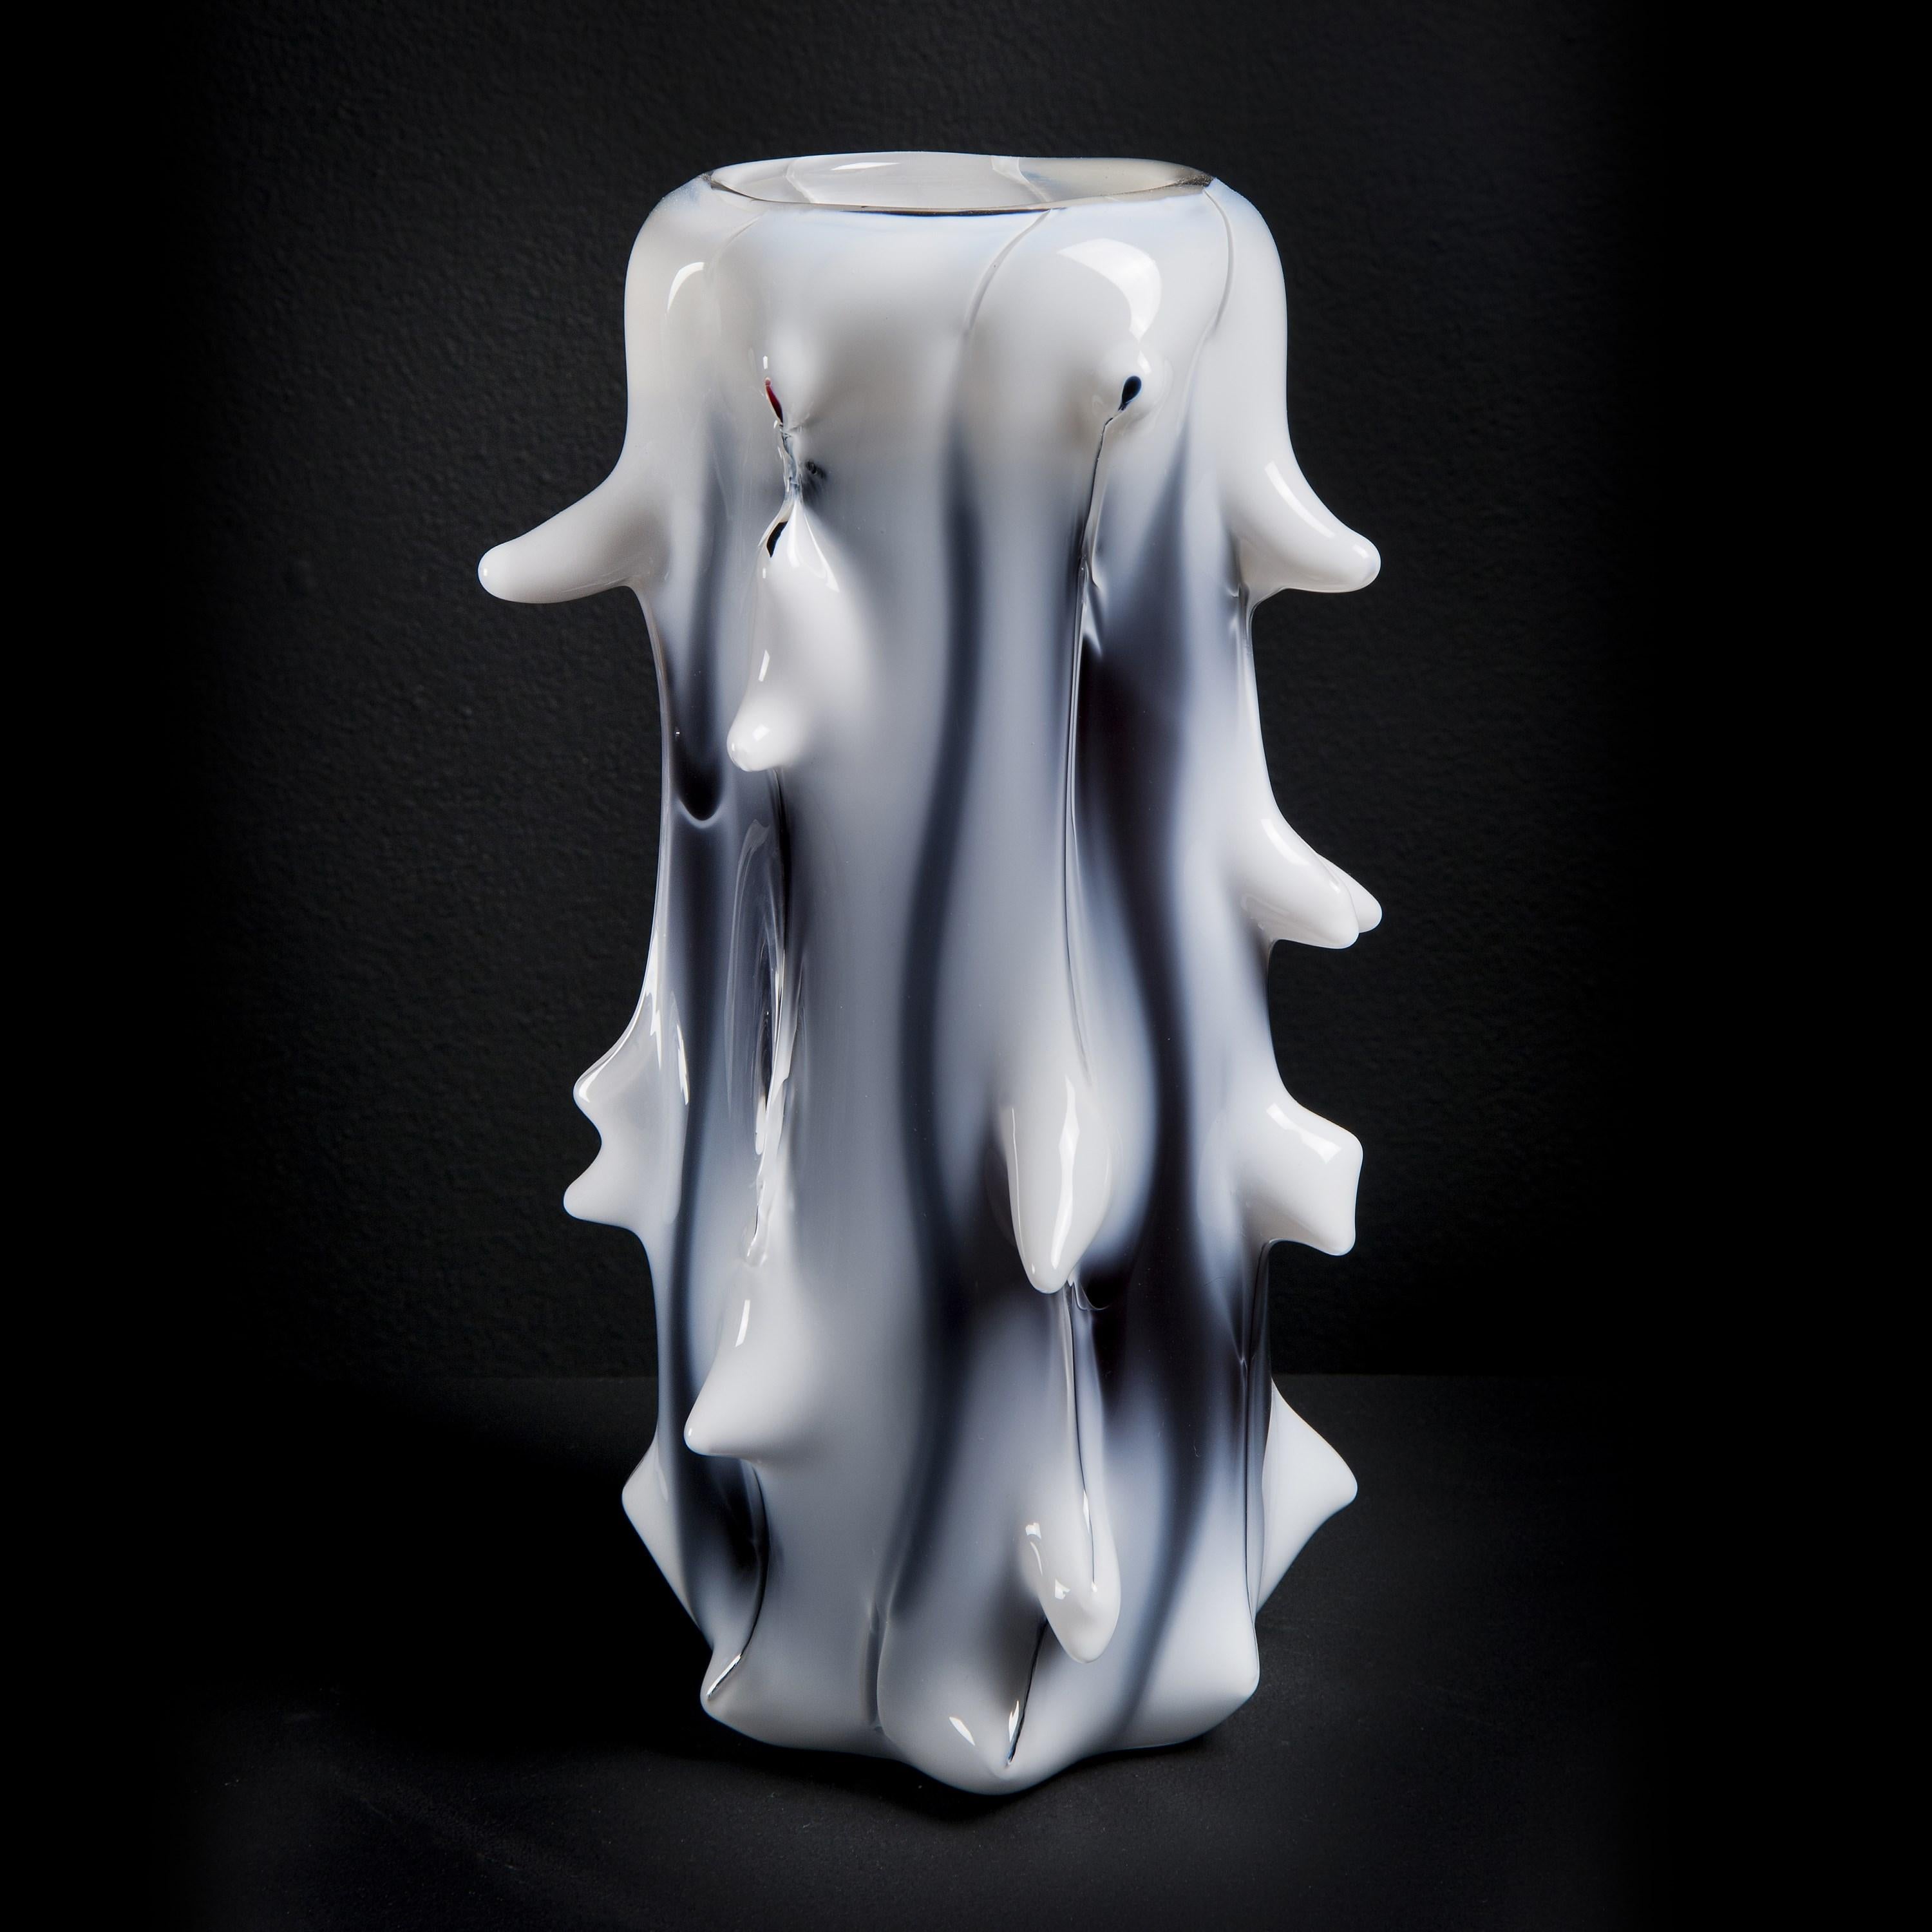 ‘Spinal III' is a limited edition (ed 49) tree-inspired white & aubergine glass vase by the Swedish artist, Mårten Medbo.

Among his work, there are numerous examples of pieces having a resemblance to anthropomorphic or biomorphic structures,